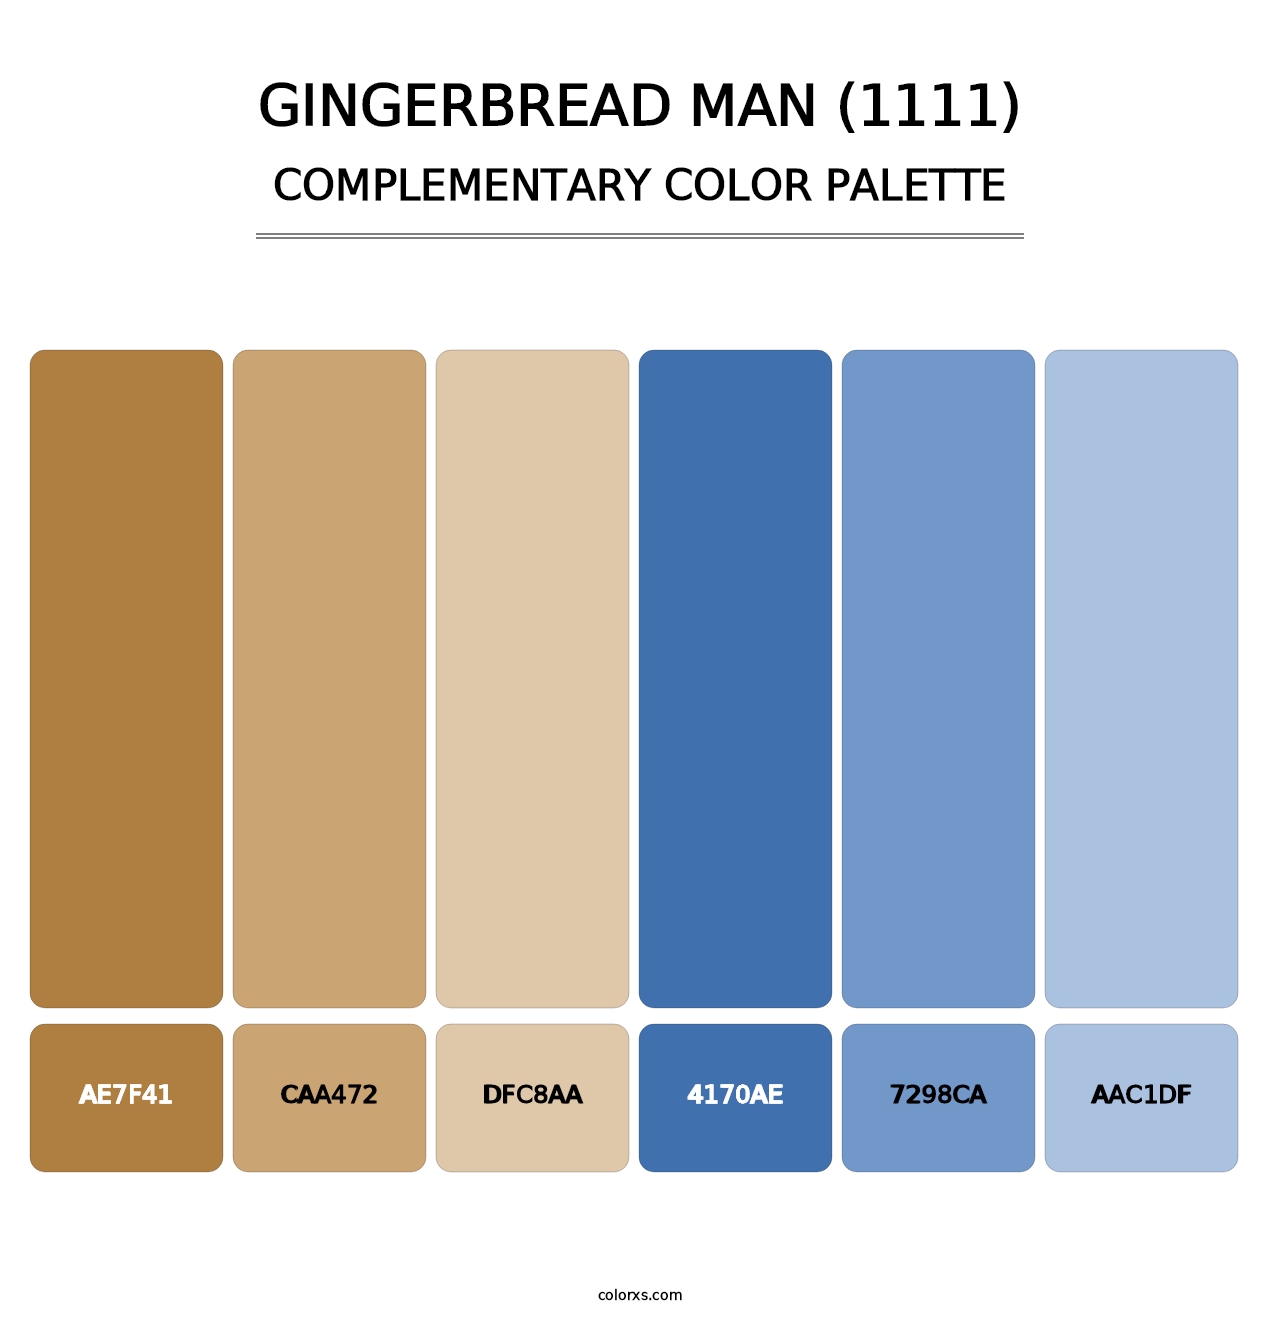 Gingerbread Man (1111) - Complementary Color Palette